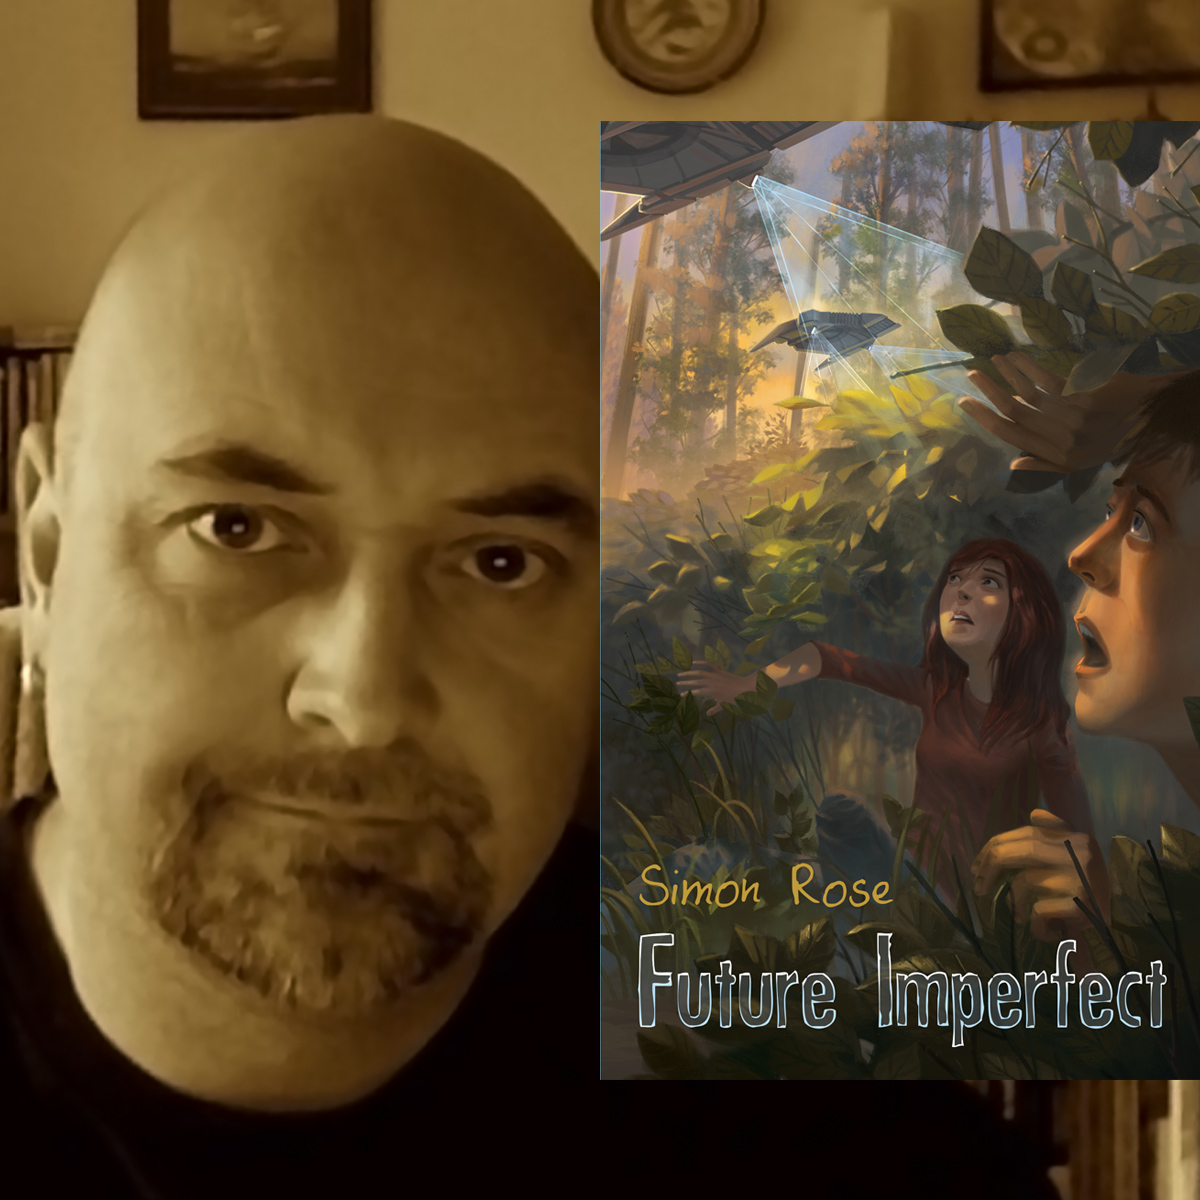 Simon Rose releases his new novel Future Imperfect